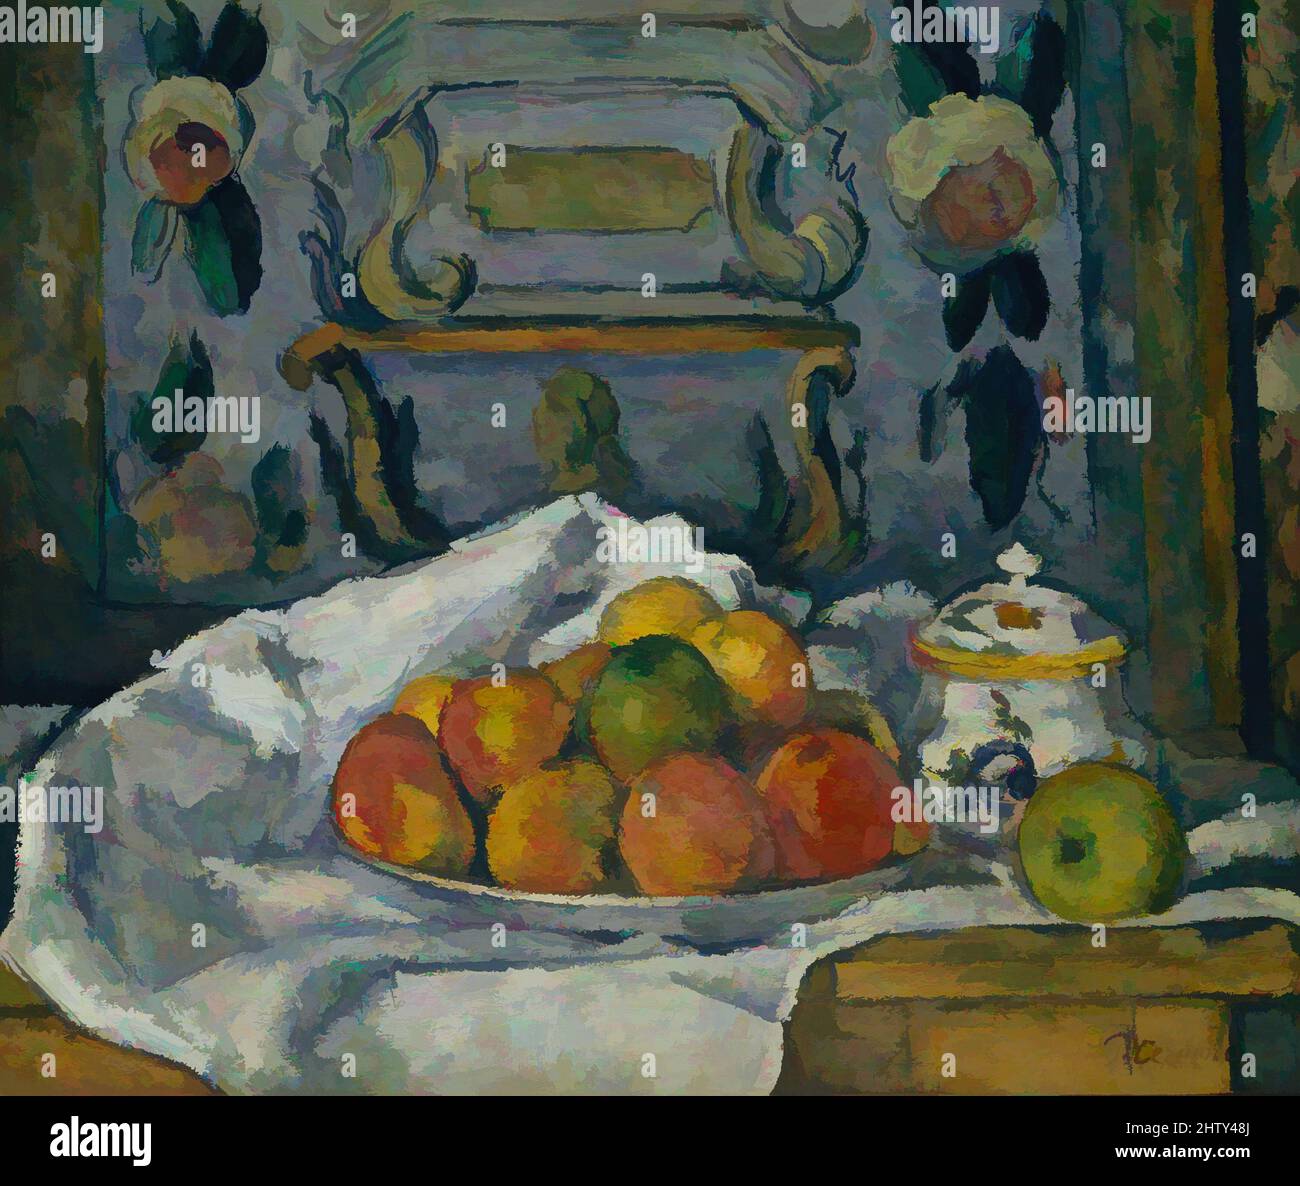 Art inspired by Dish of Apples, ca. 1876–77, Oil on canvas, 18 1/8 x 21 3/4 in. (46 x 55.2 cm), Paintings, Paul Cézanne (French, Aix-en-Provence 1839–1906 Aix-en-Provence), This rich and dense still life, featuring a napkin shaped like Mont Sainte-Victoire, was painted about 1876–77 in, Classic works modernized by Artotop with a splash of modernity. Shapes, color and value, eye-catching visual impact on art. Emotions through freedom of artworks in a contemporary way. A timeless message pursuing a wildly creative new direction. Artists turning to the digital medium and creating the Artotop NFT Stock Photo